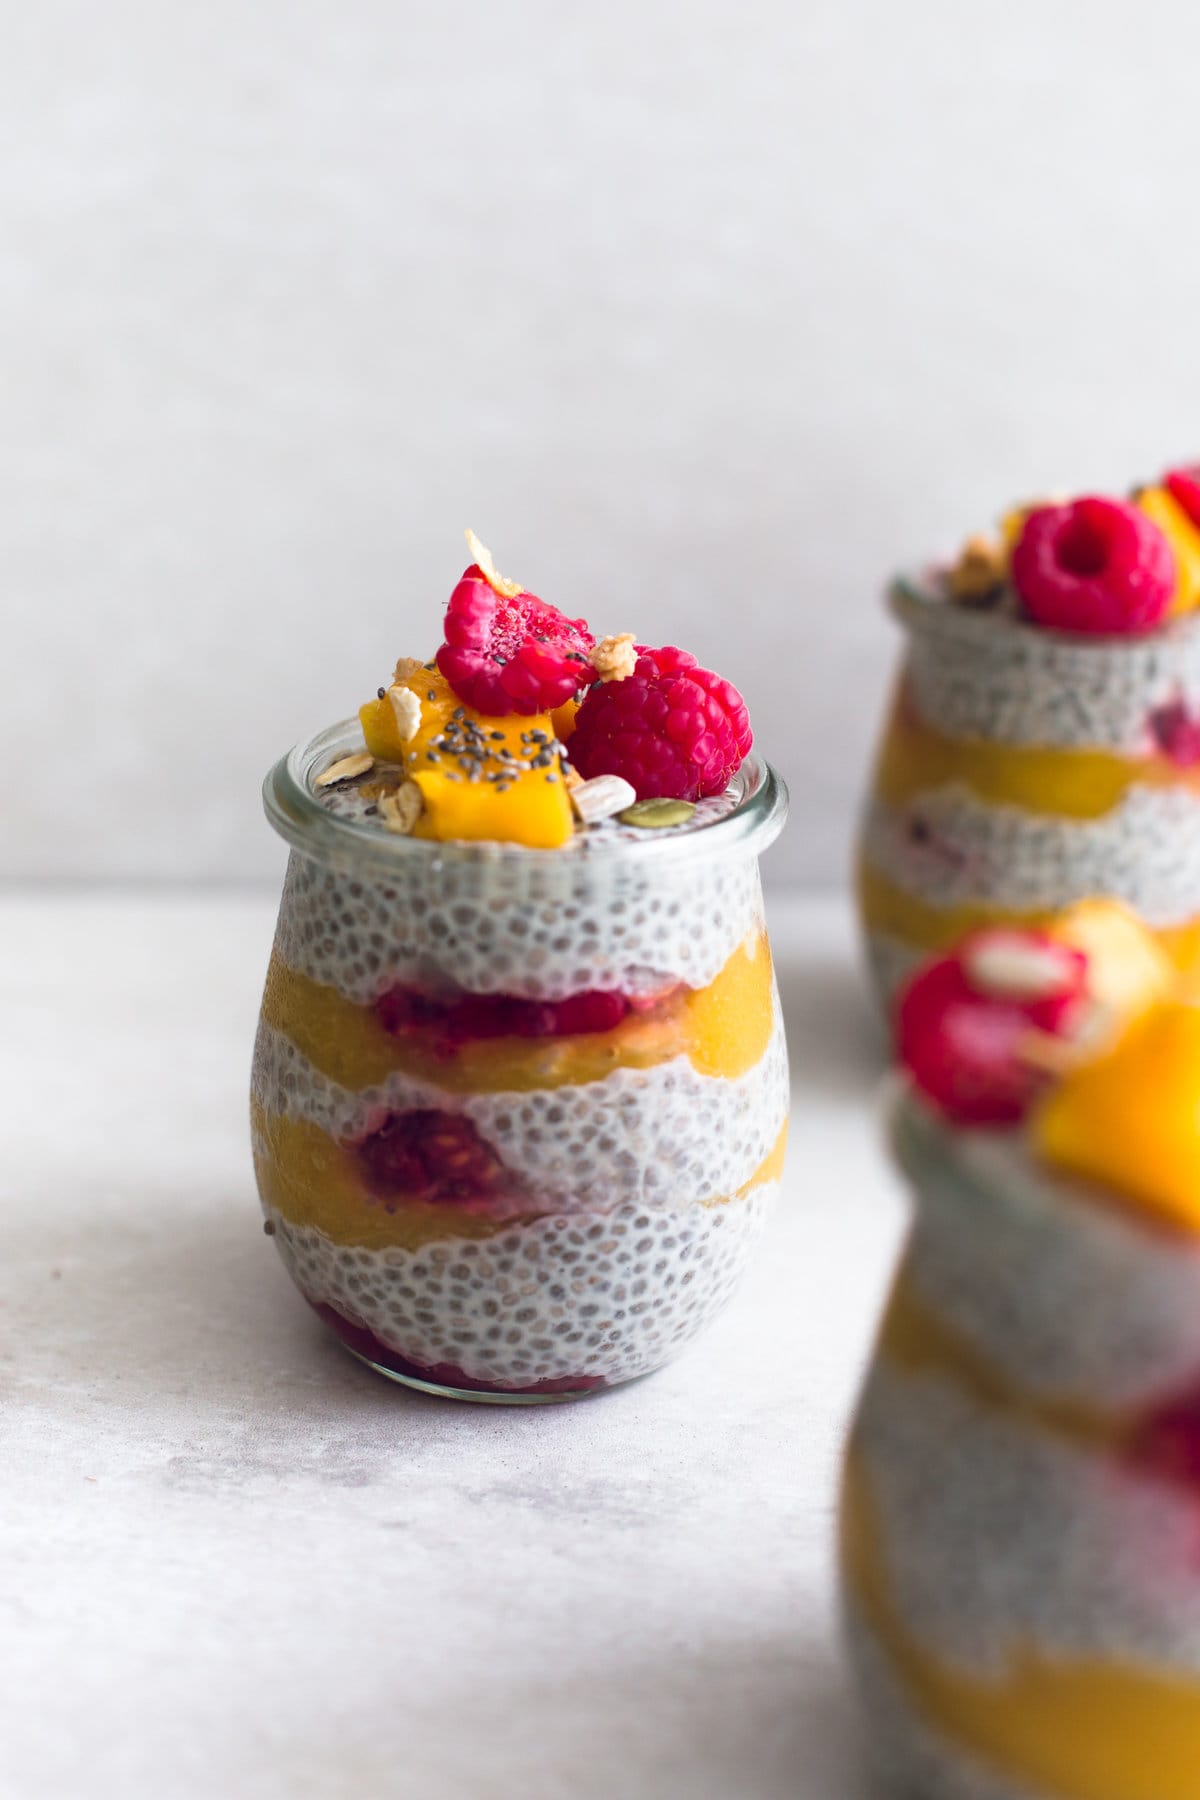 A healthy, fruity and delicious guilt-free Mango Raspberry Chia Seed Pudding. 100% Vegan, Gluten Free and Refined Sugar Free. #mango #raspberry #chia #pudding #refinedsugar #fruit #simple #healthy #breakfast #veganrecipes